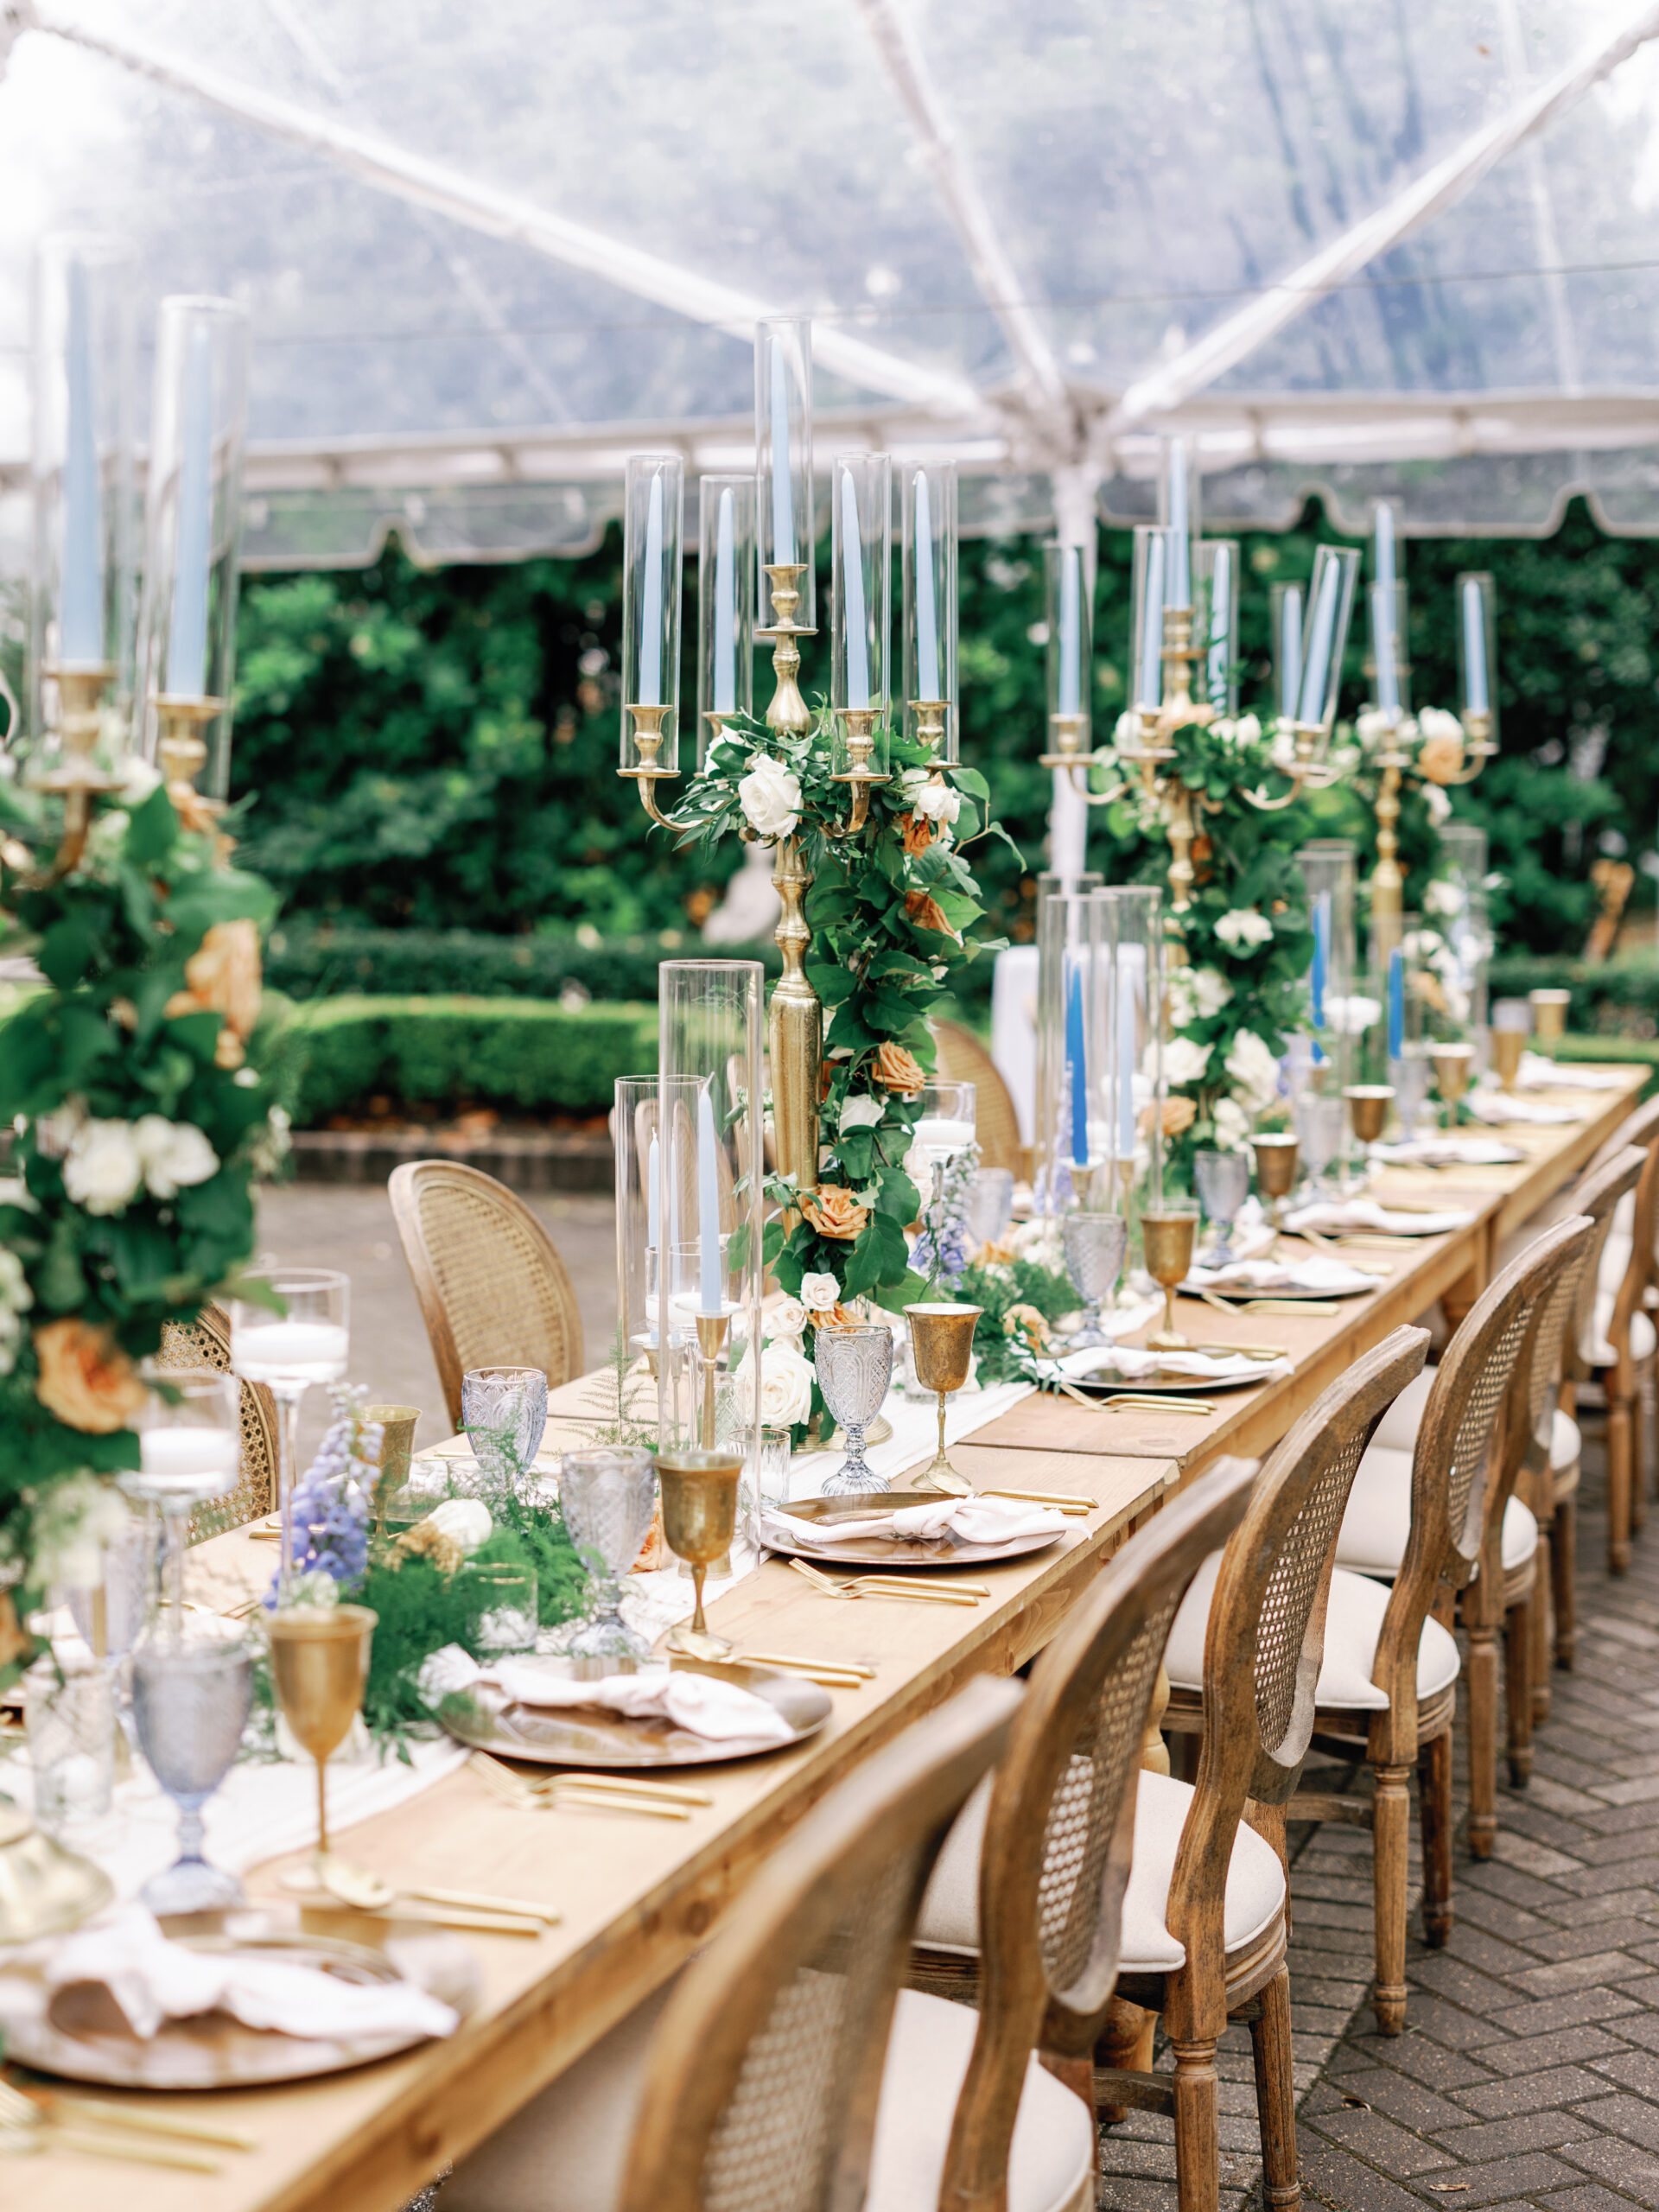 Elegant Wedding Table landscape with candles flowers and chic coordination